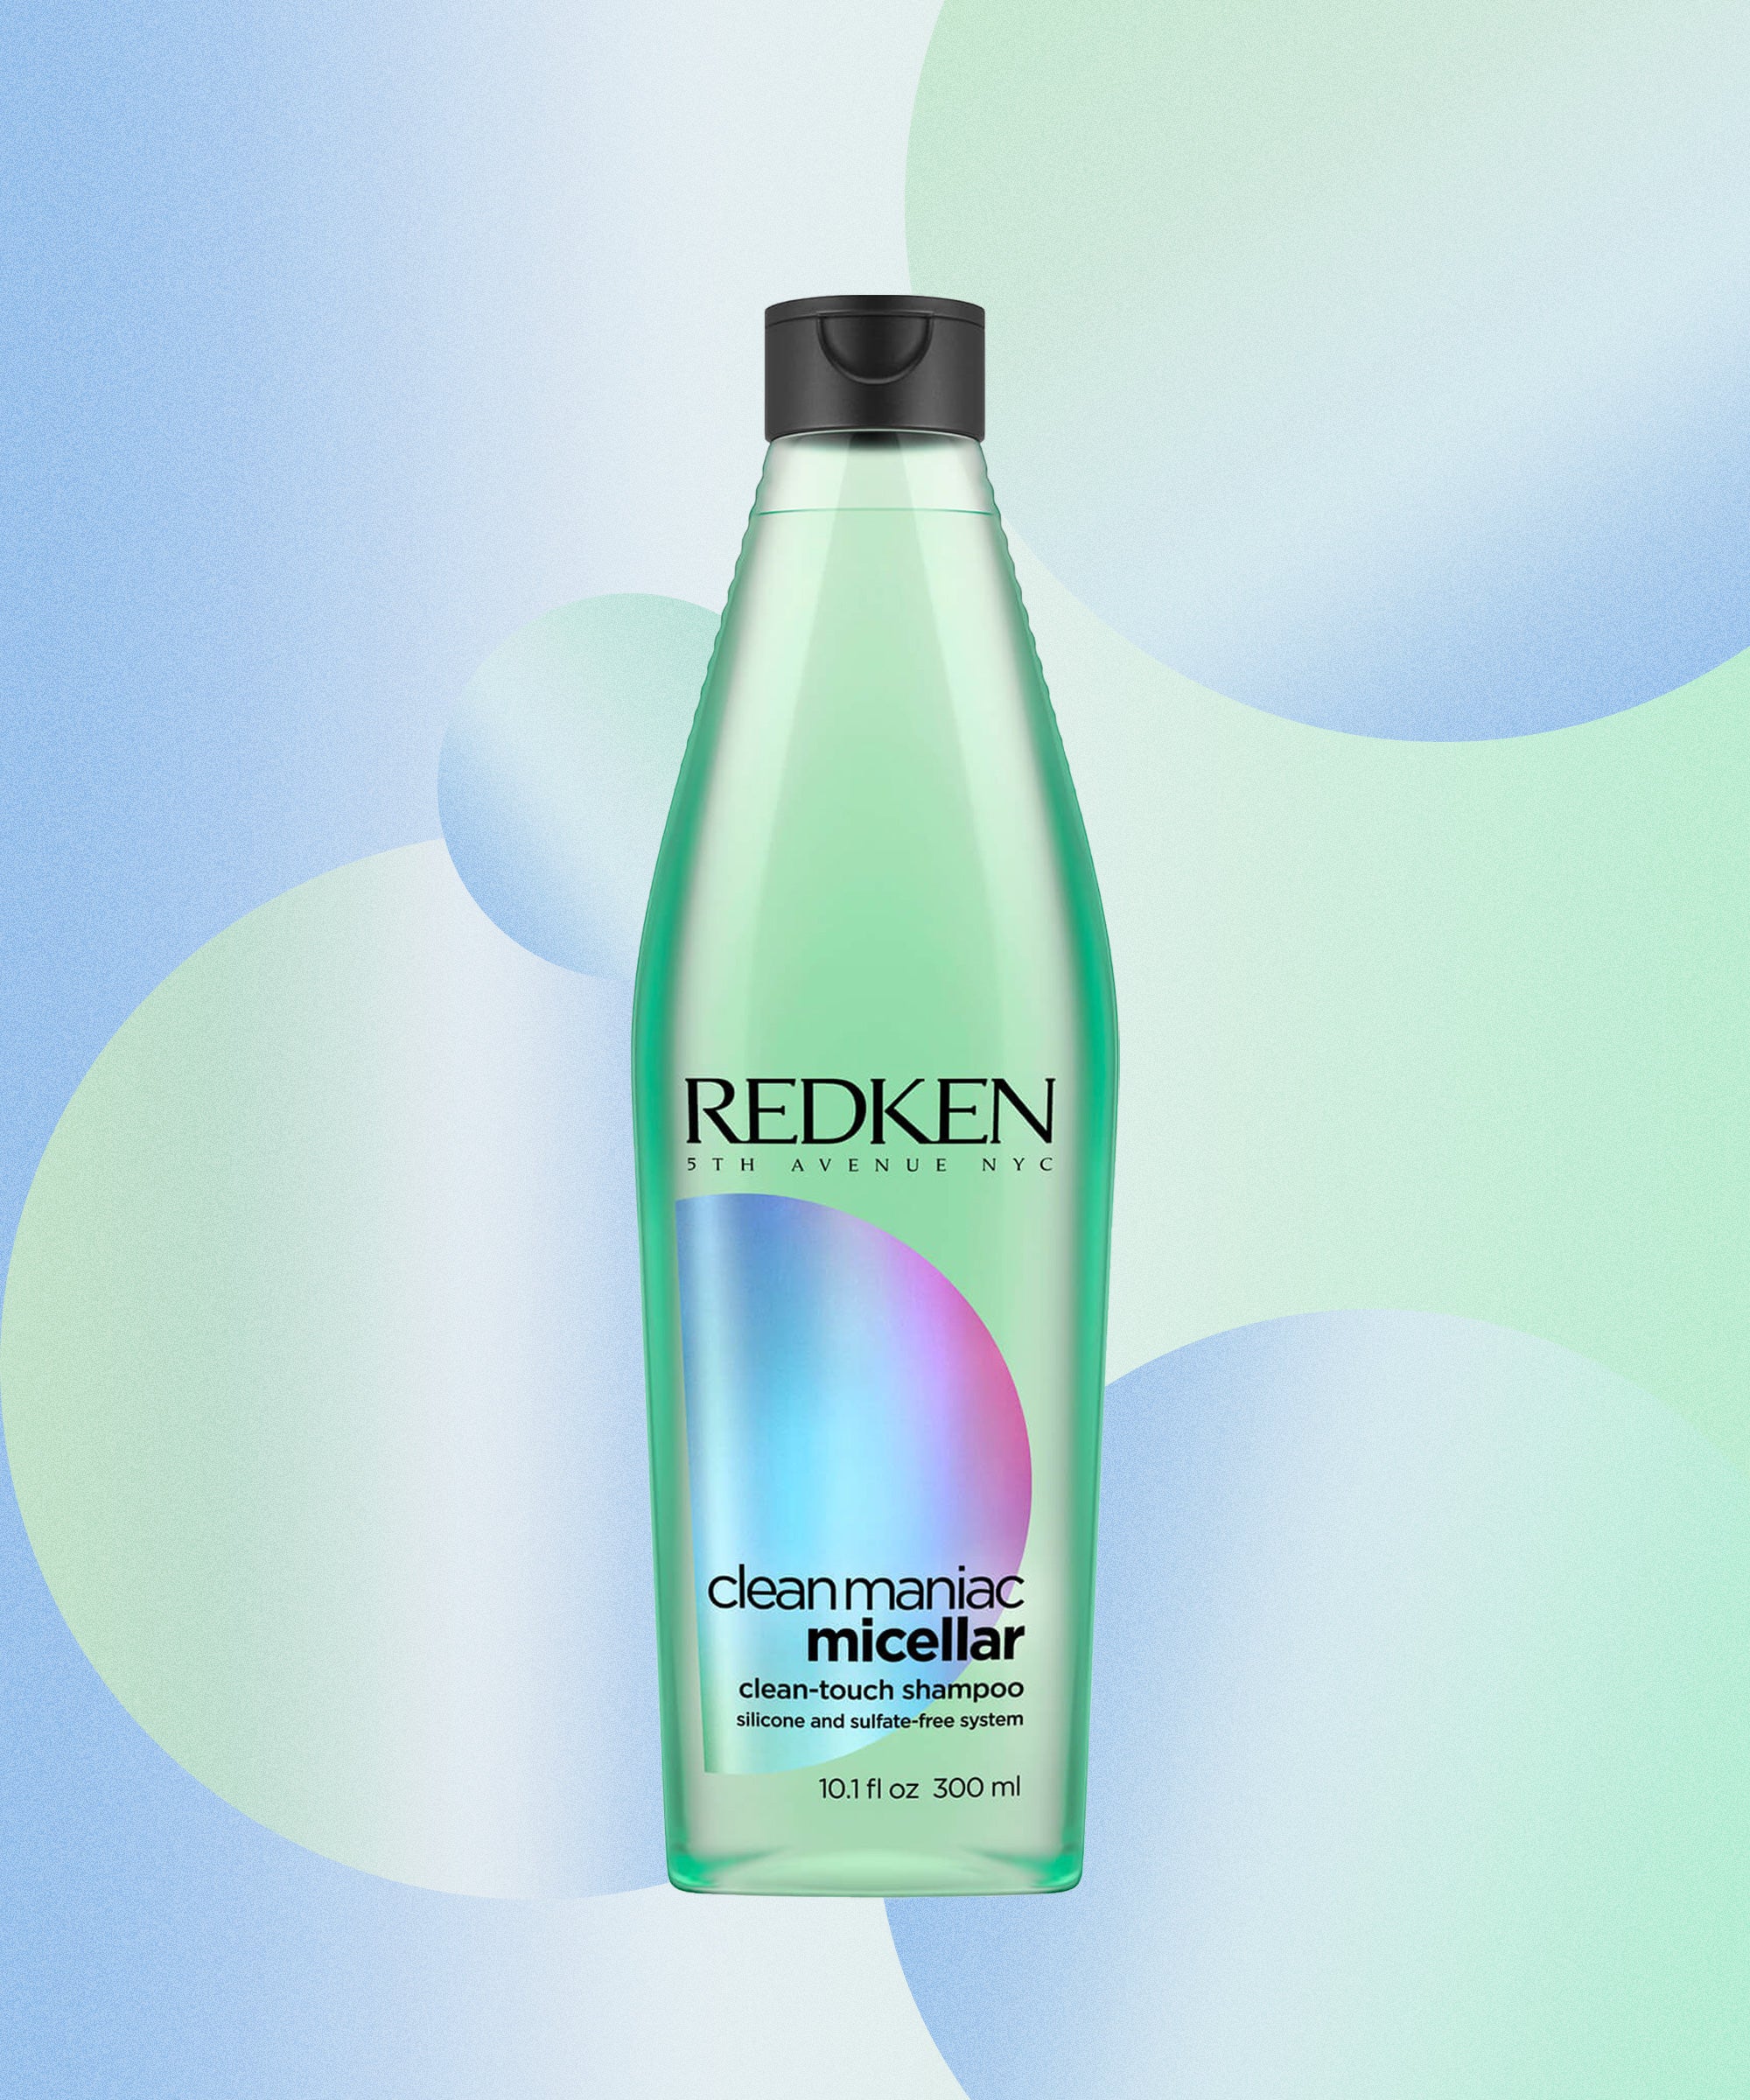 en lille om Final Best Clarifying Shampoo To Remove Build-Up On Hair